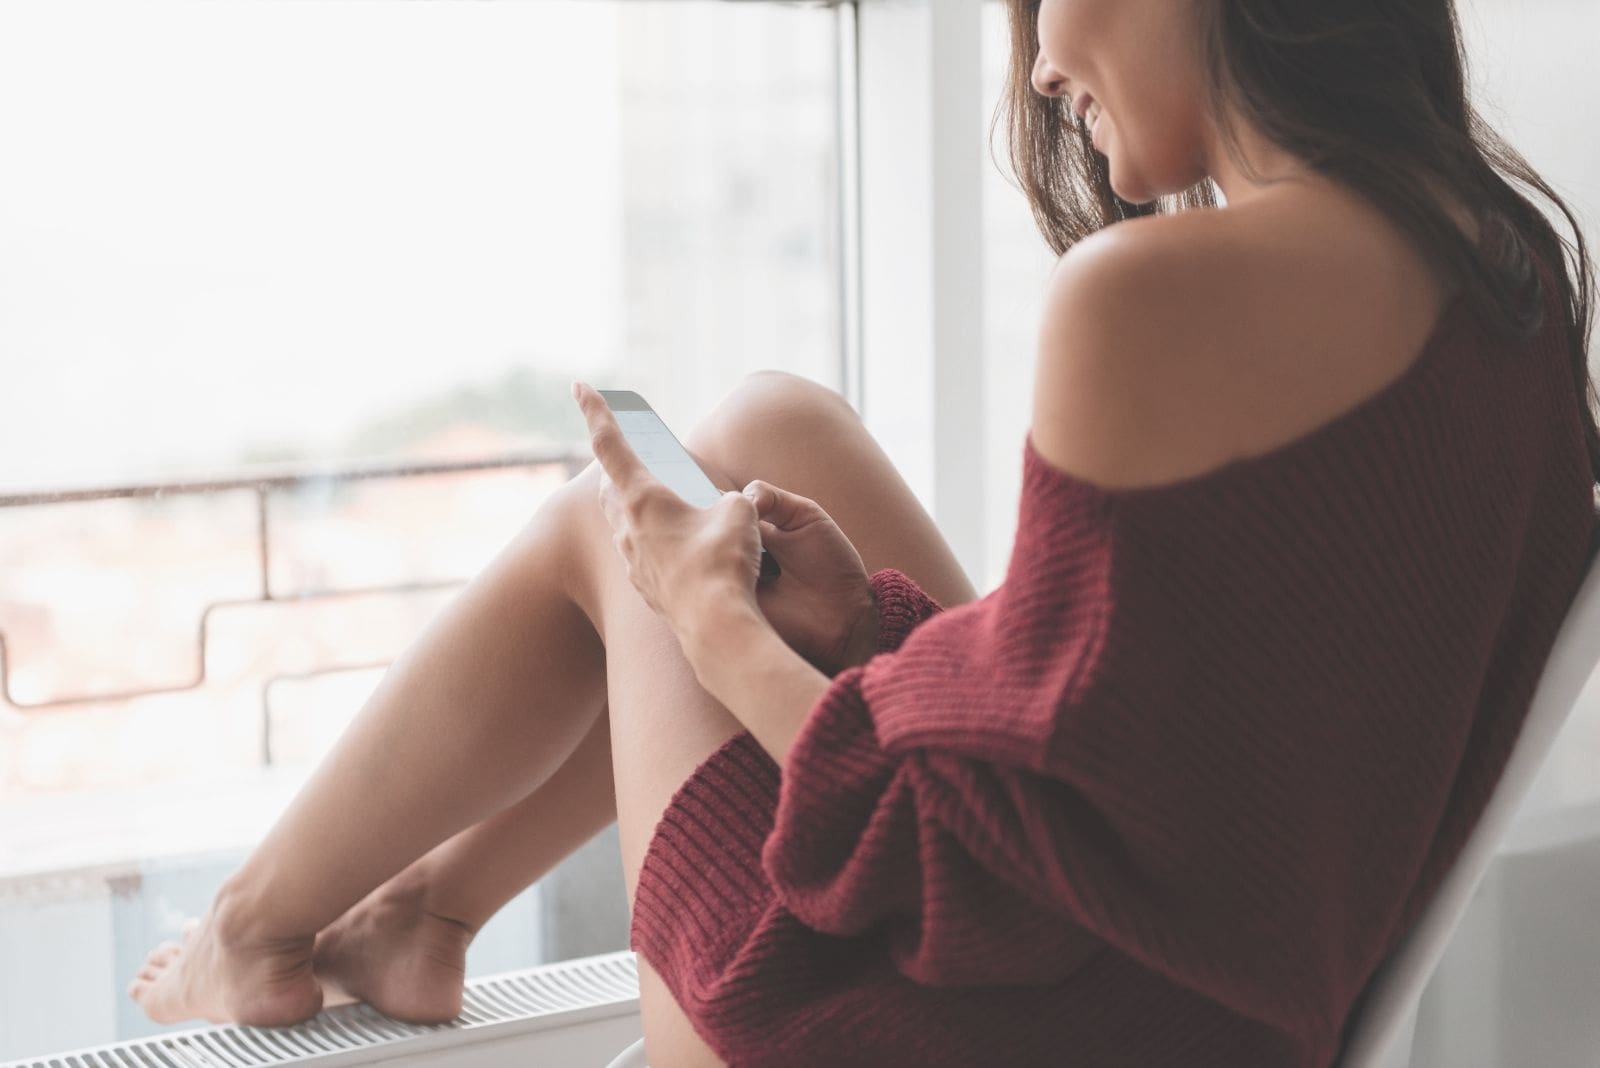 woman smiling and texting while sitting in the window sill in cropped image